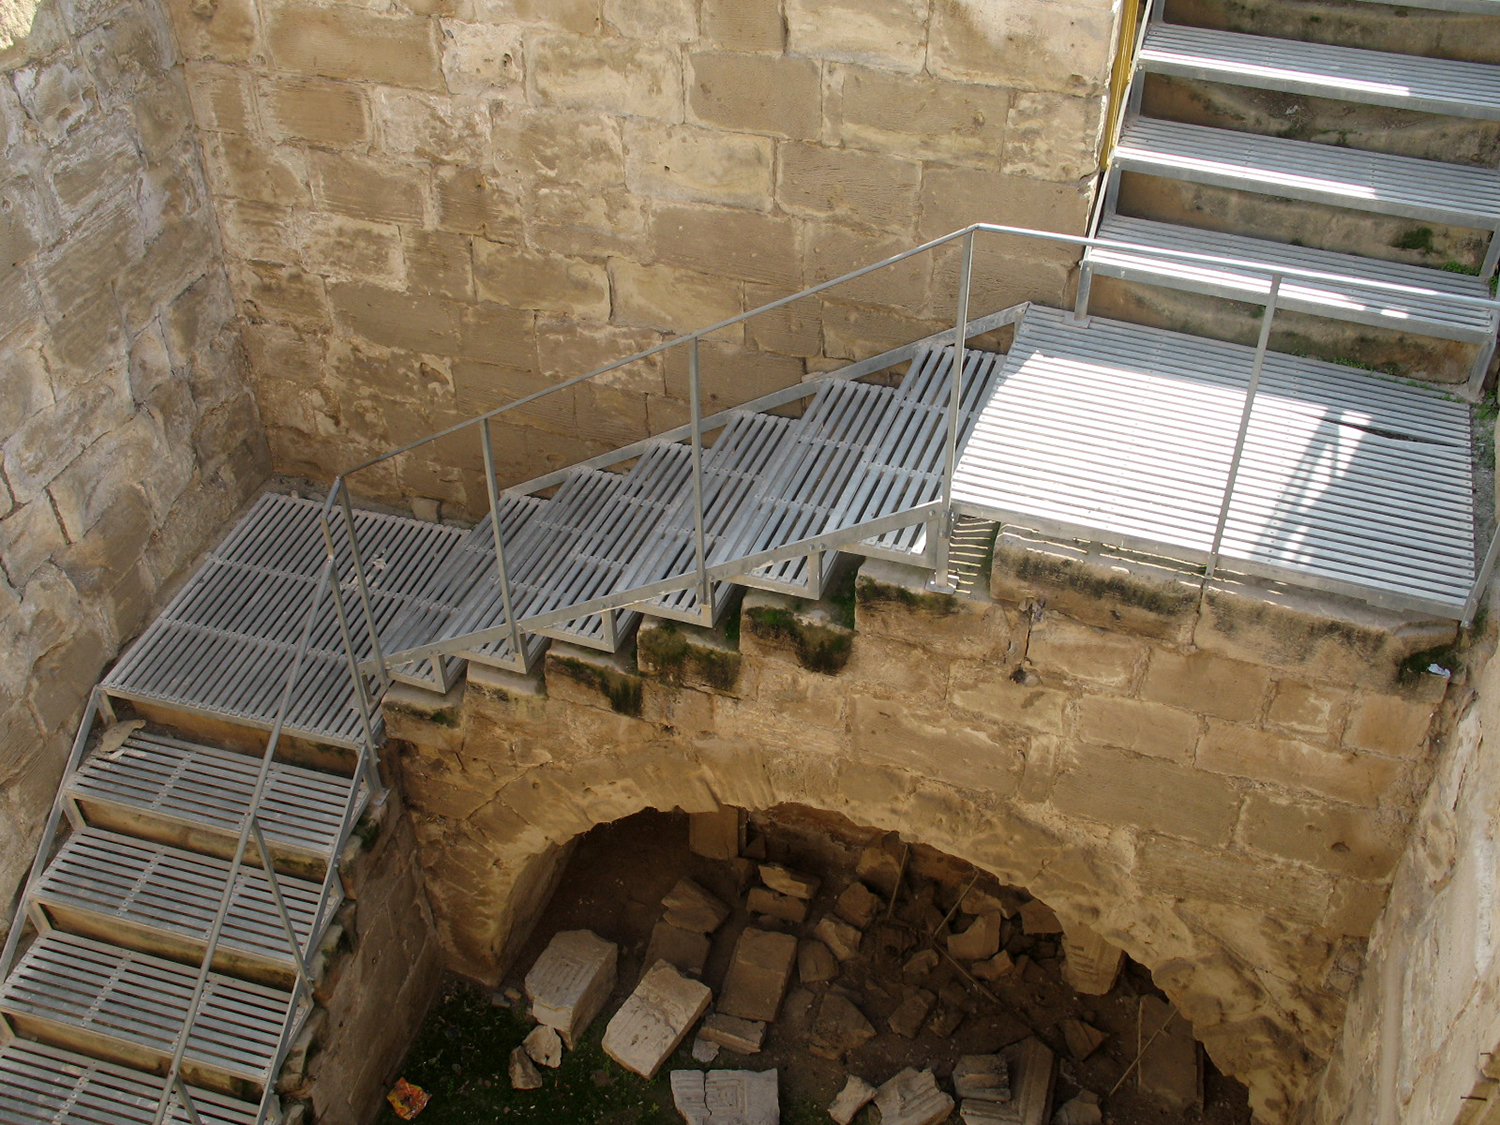 Top view showing the protected steps 